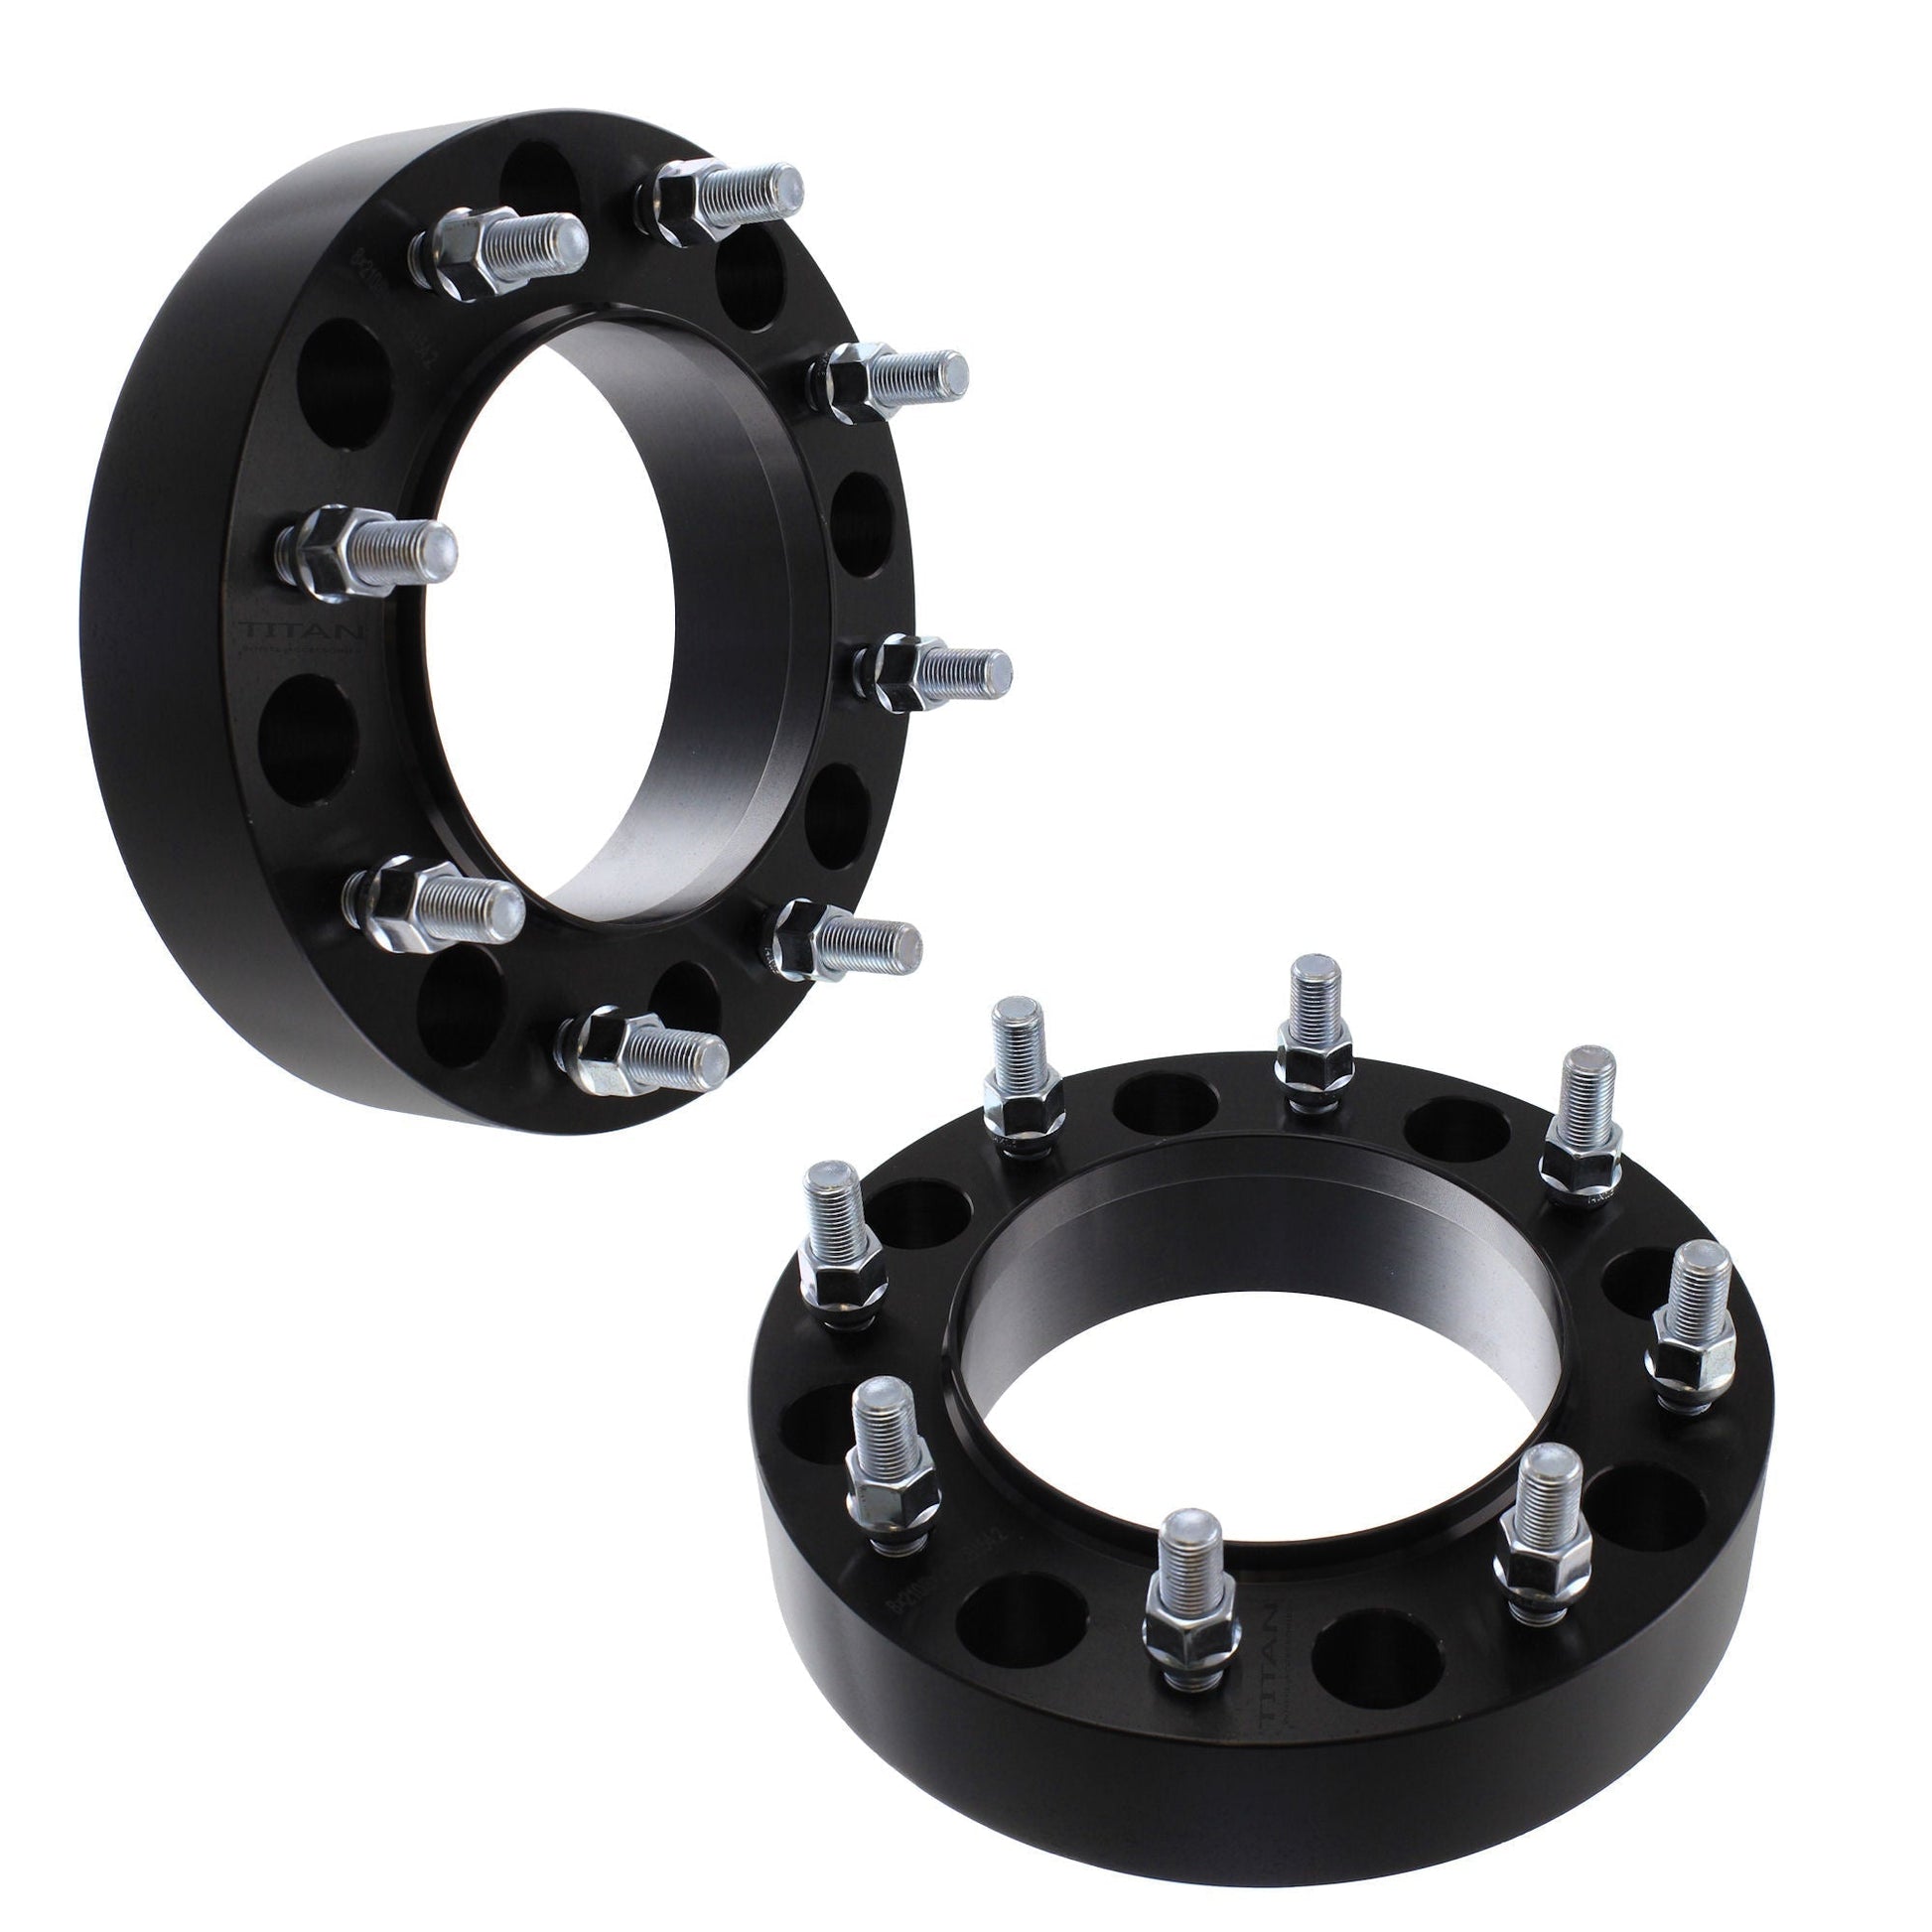 2" (50mm) Titan Wheel Spacers for Nissan NV Ram 2500 3500 | 8x6.5 | 121.3 Hubcentric |14x1.5 Studs |  Set of 4 | Titan Wheel Accessories